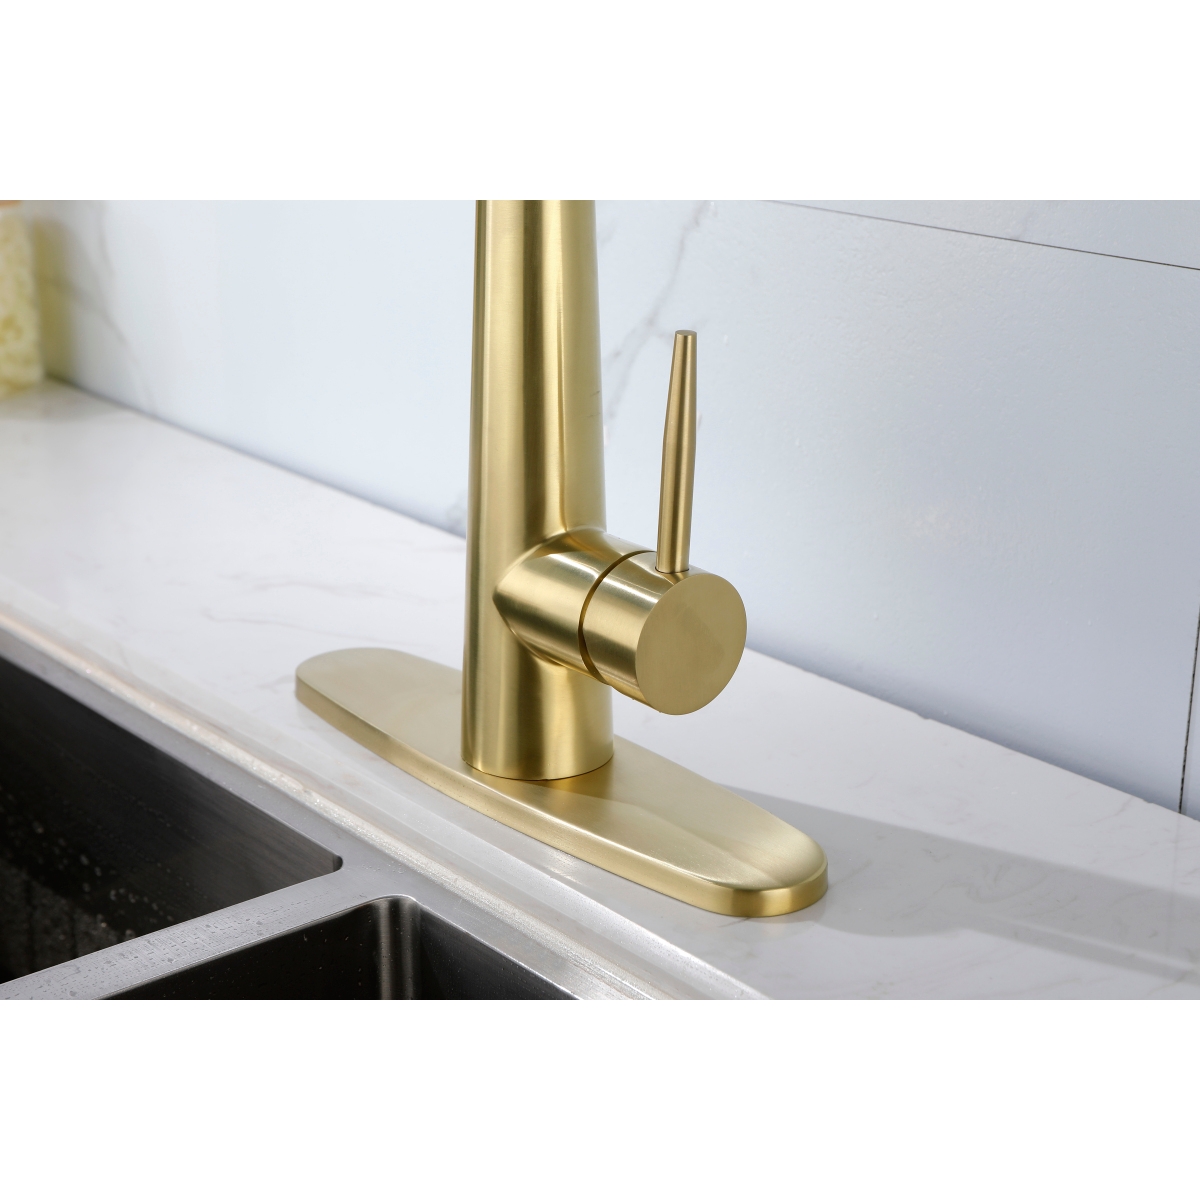 Gold Kitchen Faucets With Pull Down Sprayer, Kitchen Sink Faucet With Pull Out Sprayer - Gold